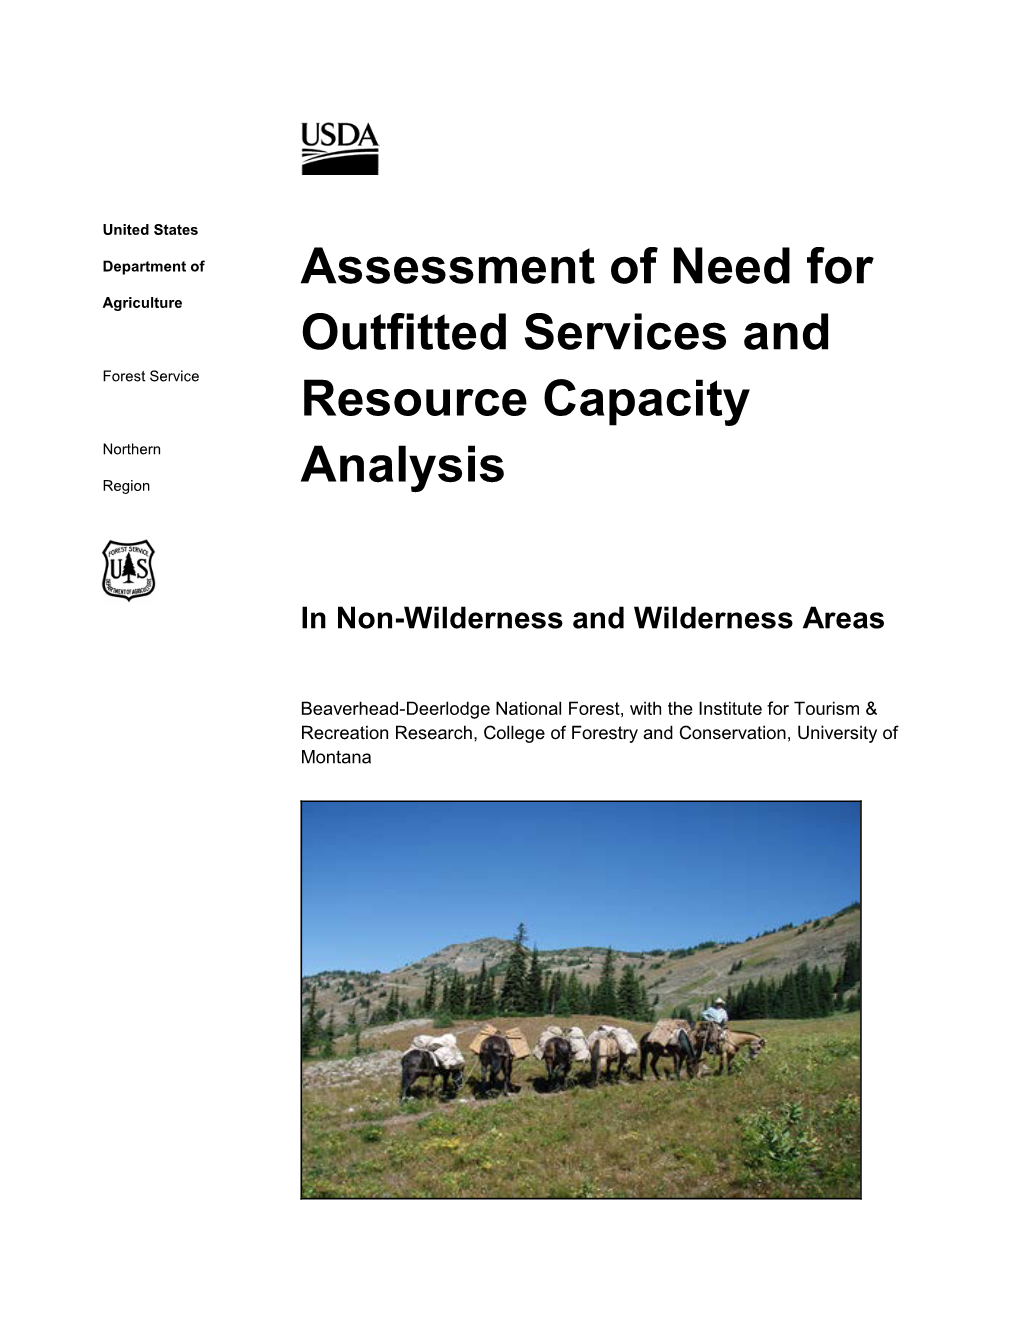 Studies on Recreation Use, Trends, and Outfitting Regionally And